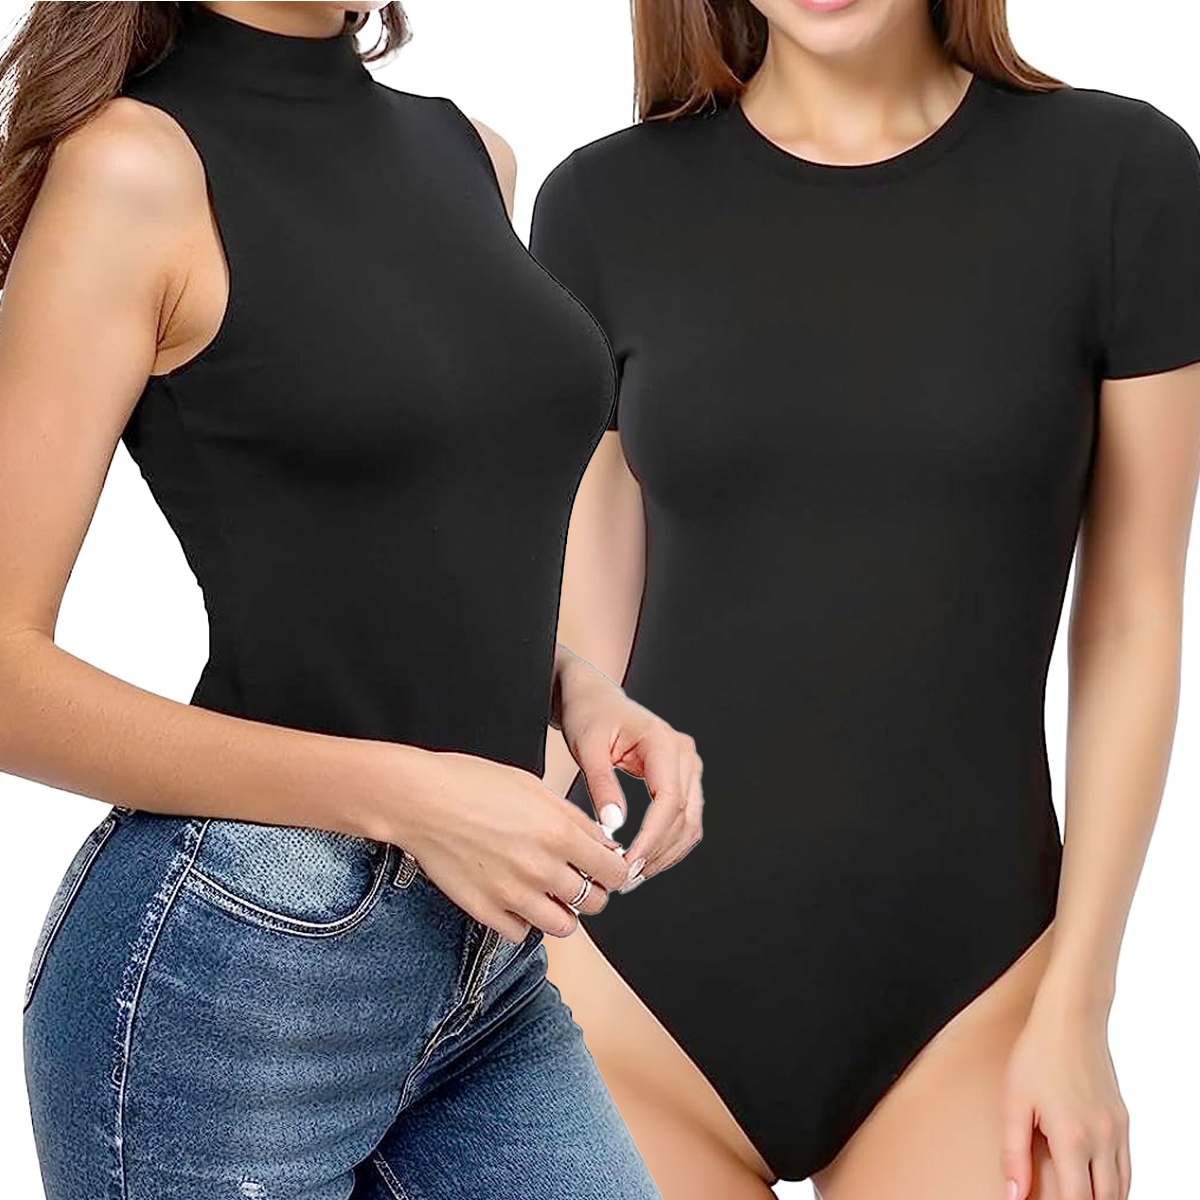 MANGOPOP Bodysuit Is Perfect for Winter and Has a Flattering